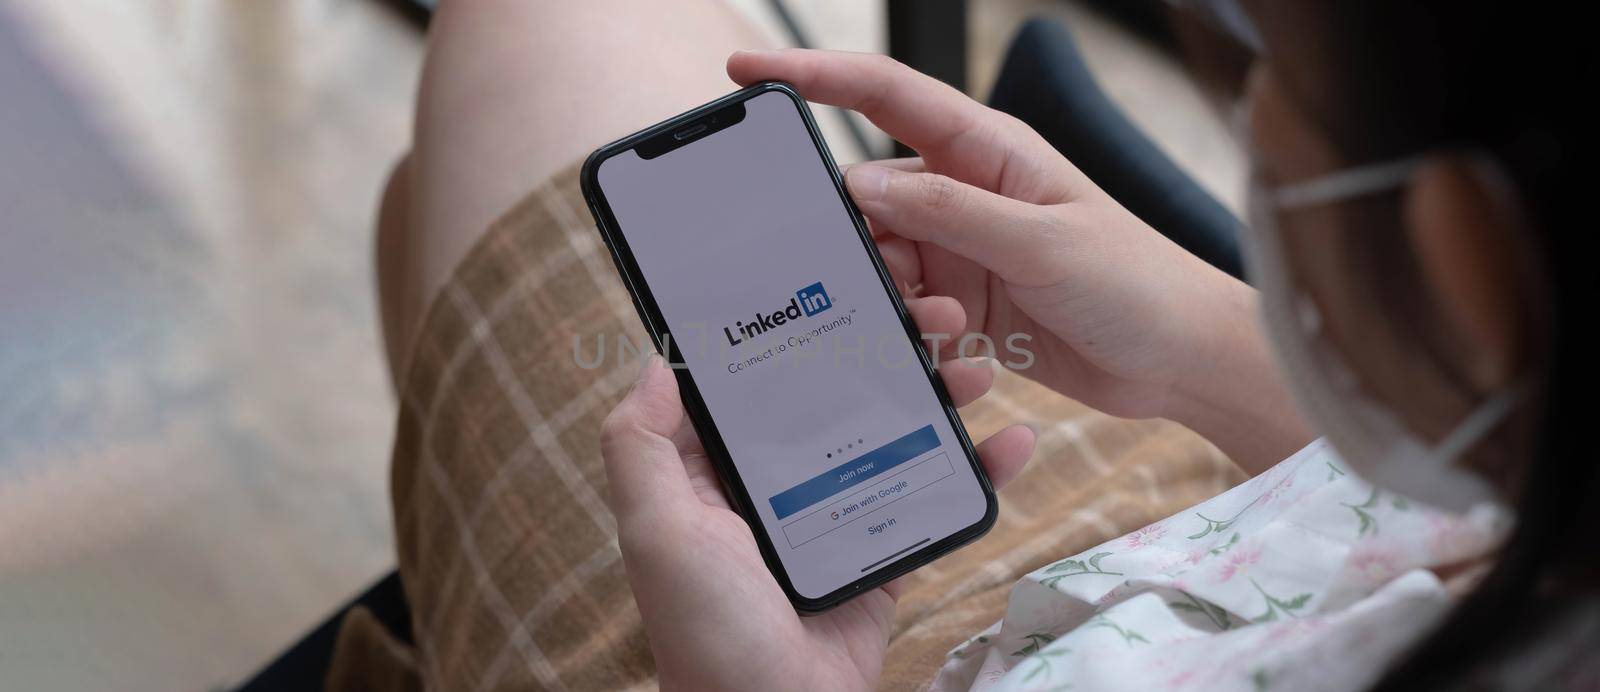 CHIANG MAI, THAILAND, NOV 14 2021 : A women holds Apple iPhone Xs with LinkedIn application on the screen.LinkedIn is a photo-sharing app for smartphones. by wichayada